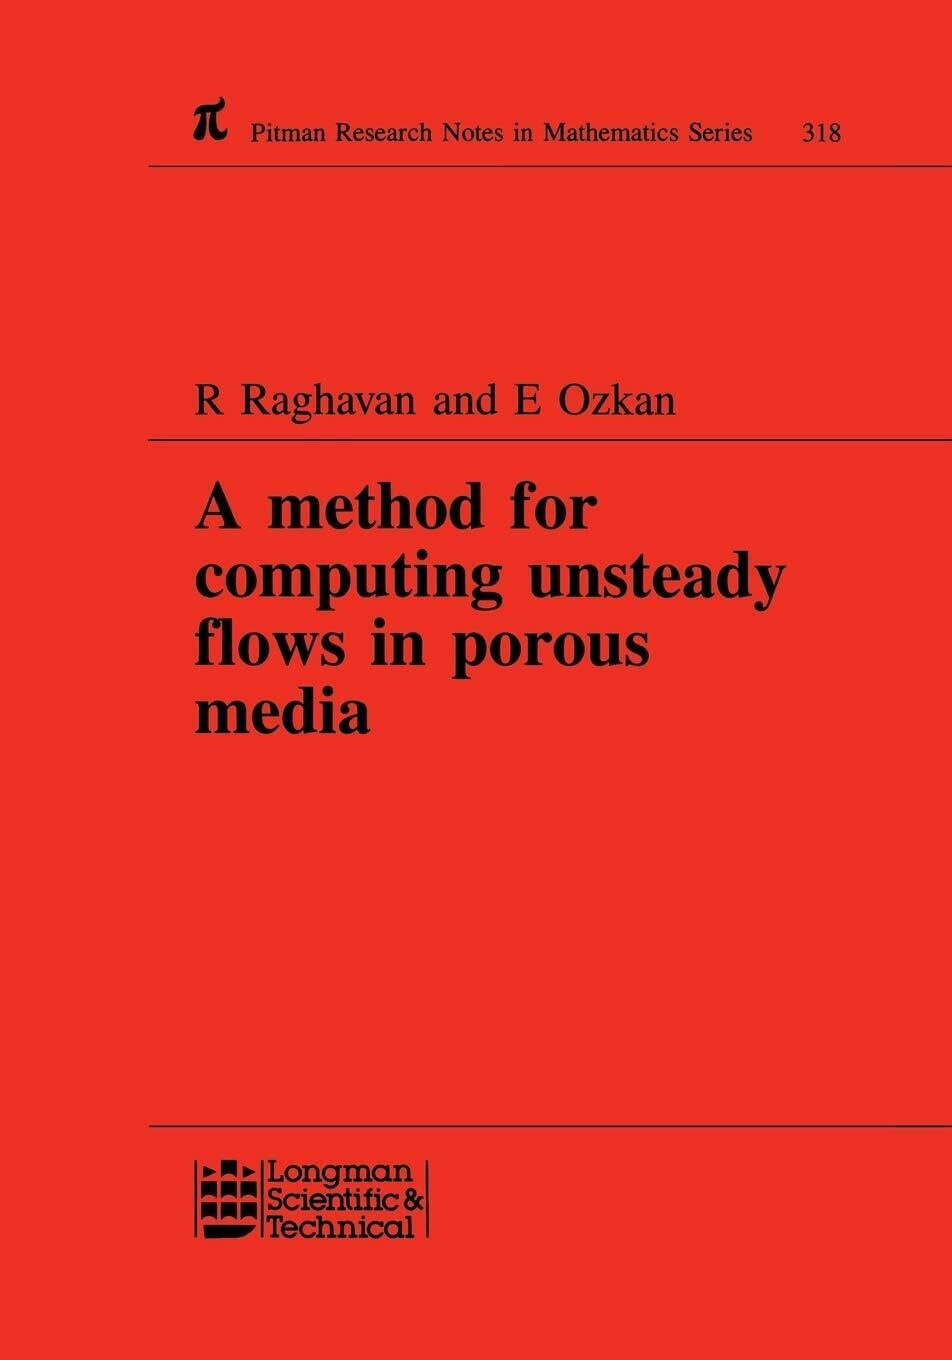 A Method for Computing Unsteady Flows in Porous Media - CRC Press, 1995